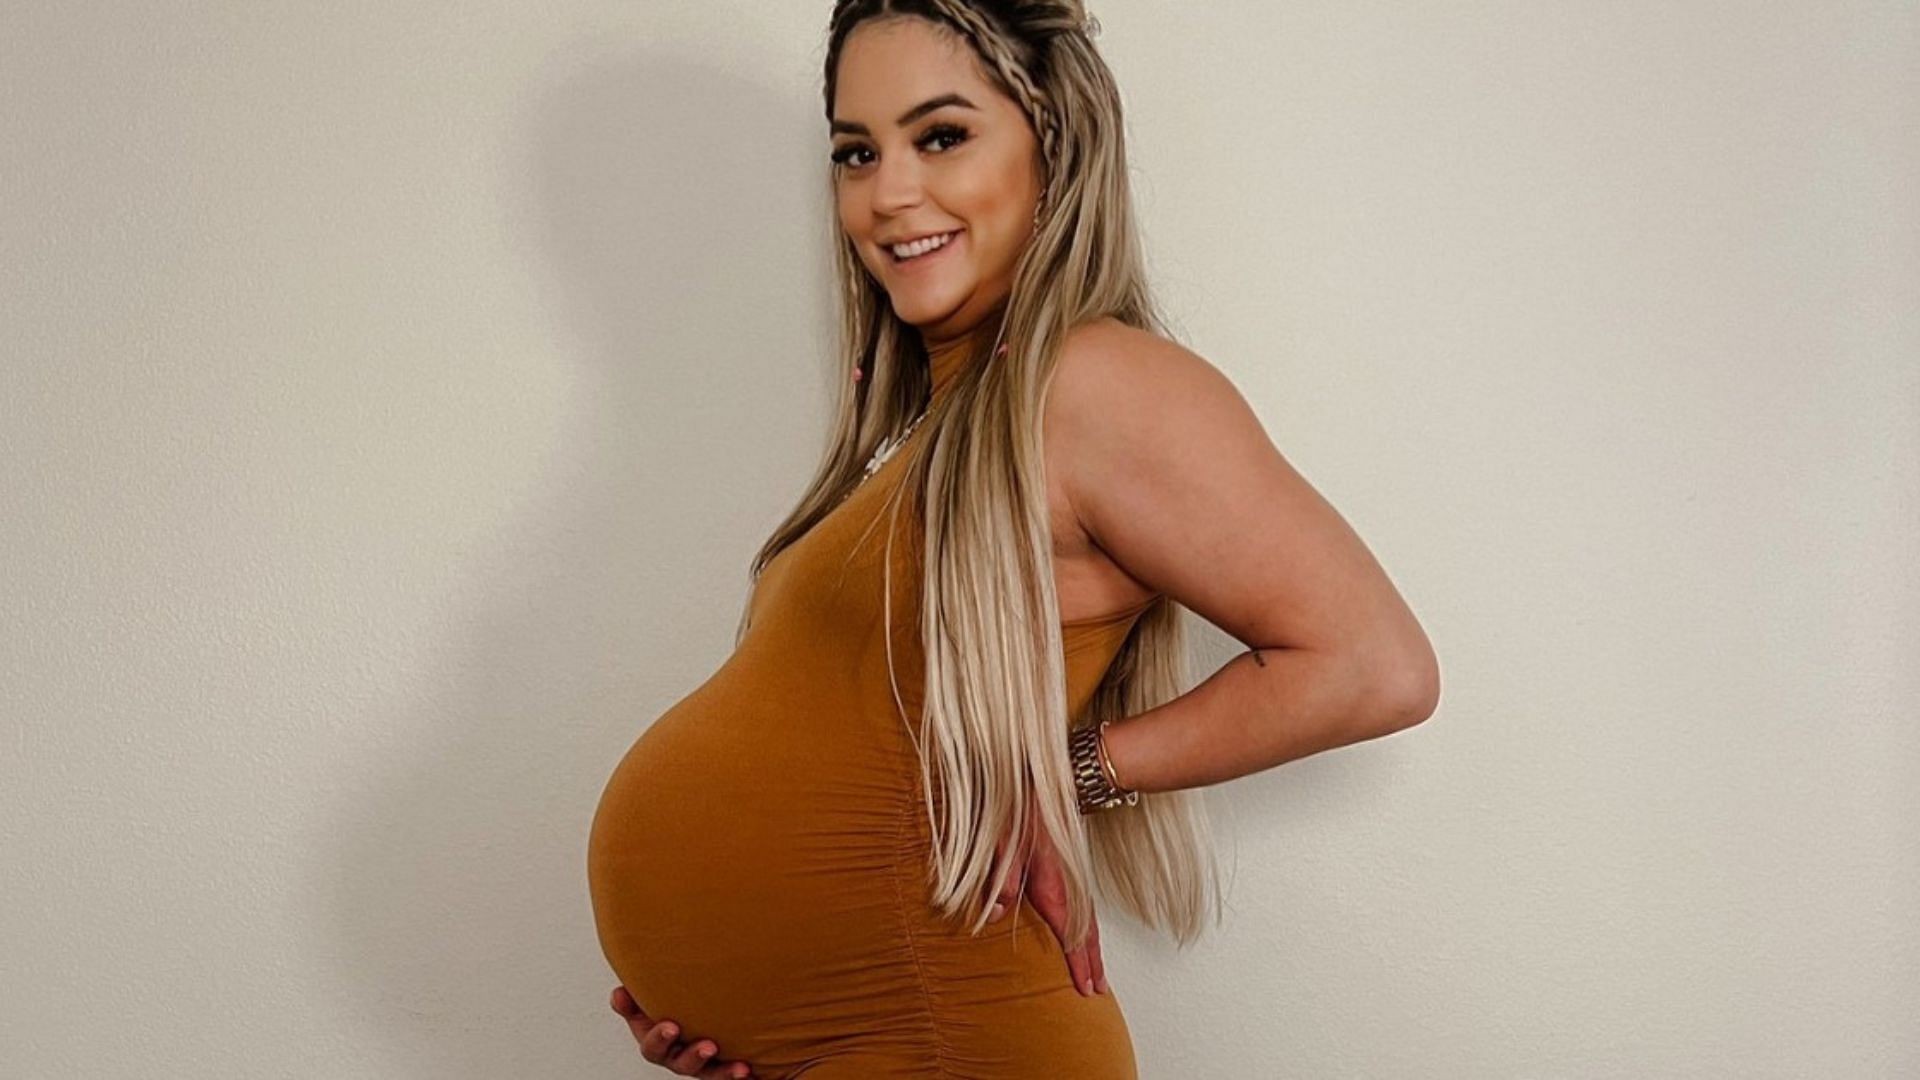 Tay Melo has shown off her baby bump